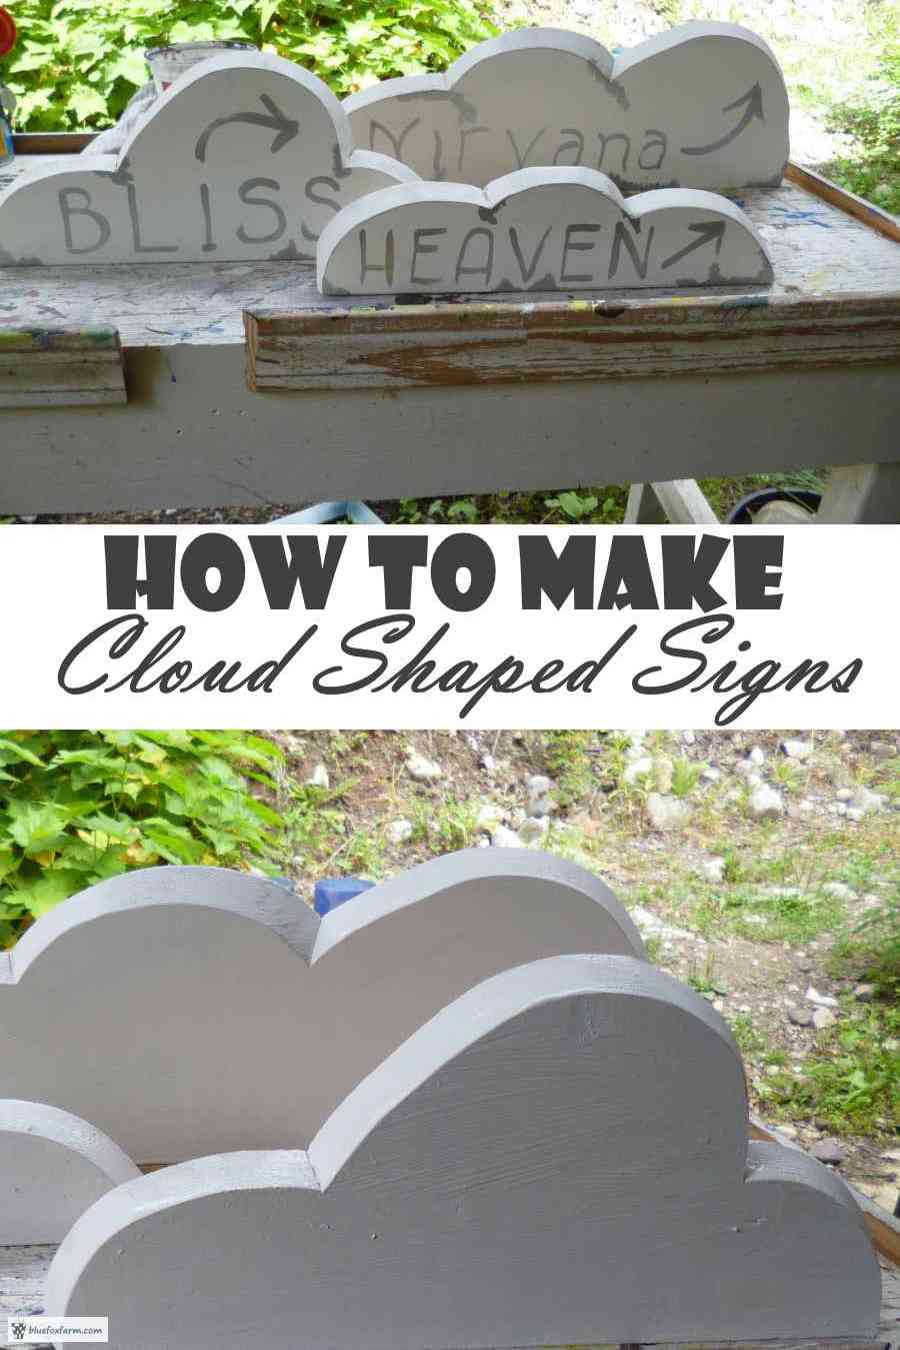 Cloud Shape Signs - How to DIY